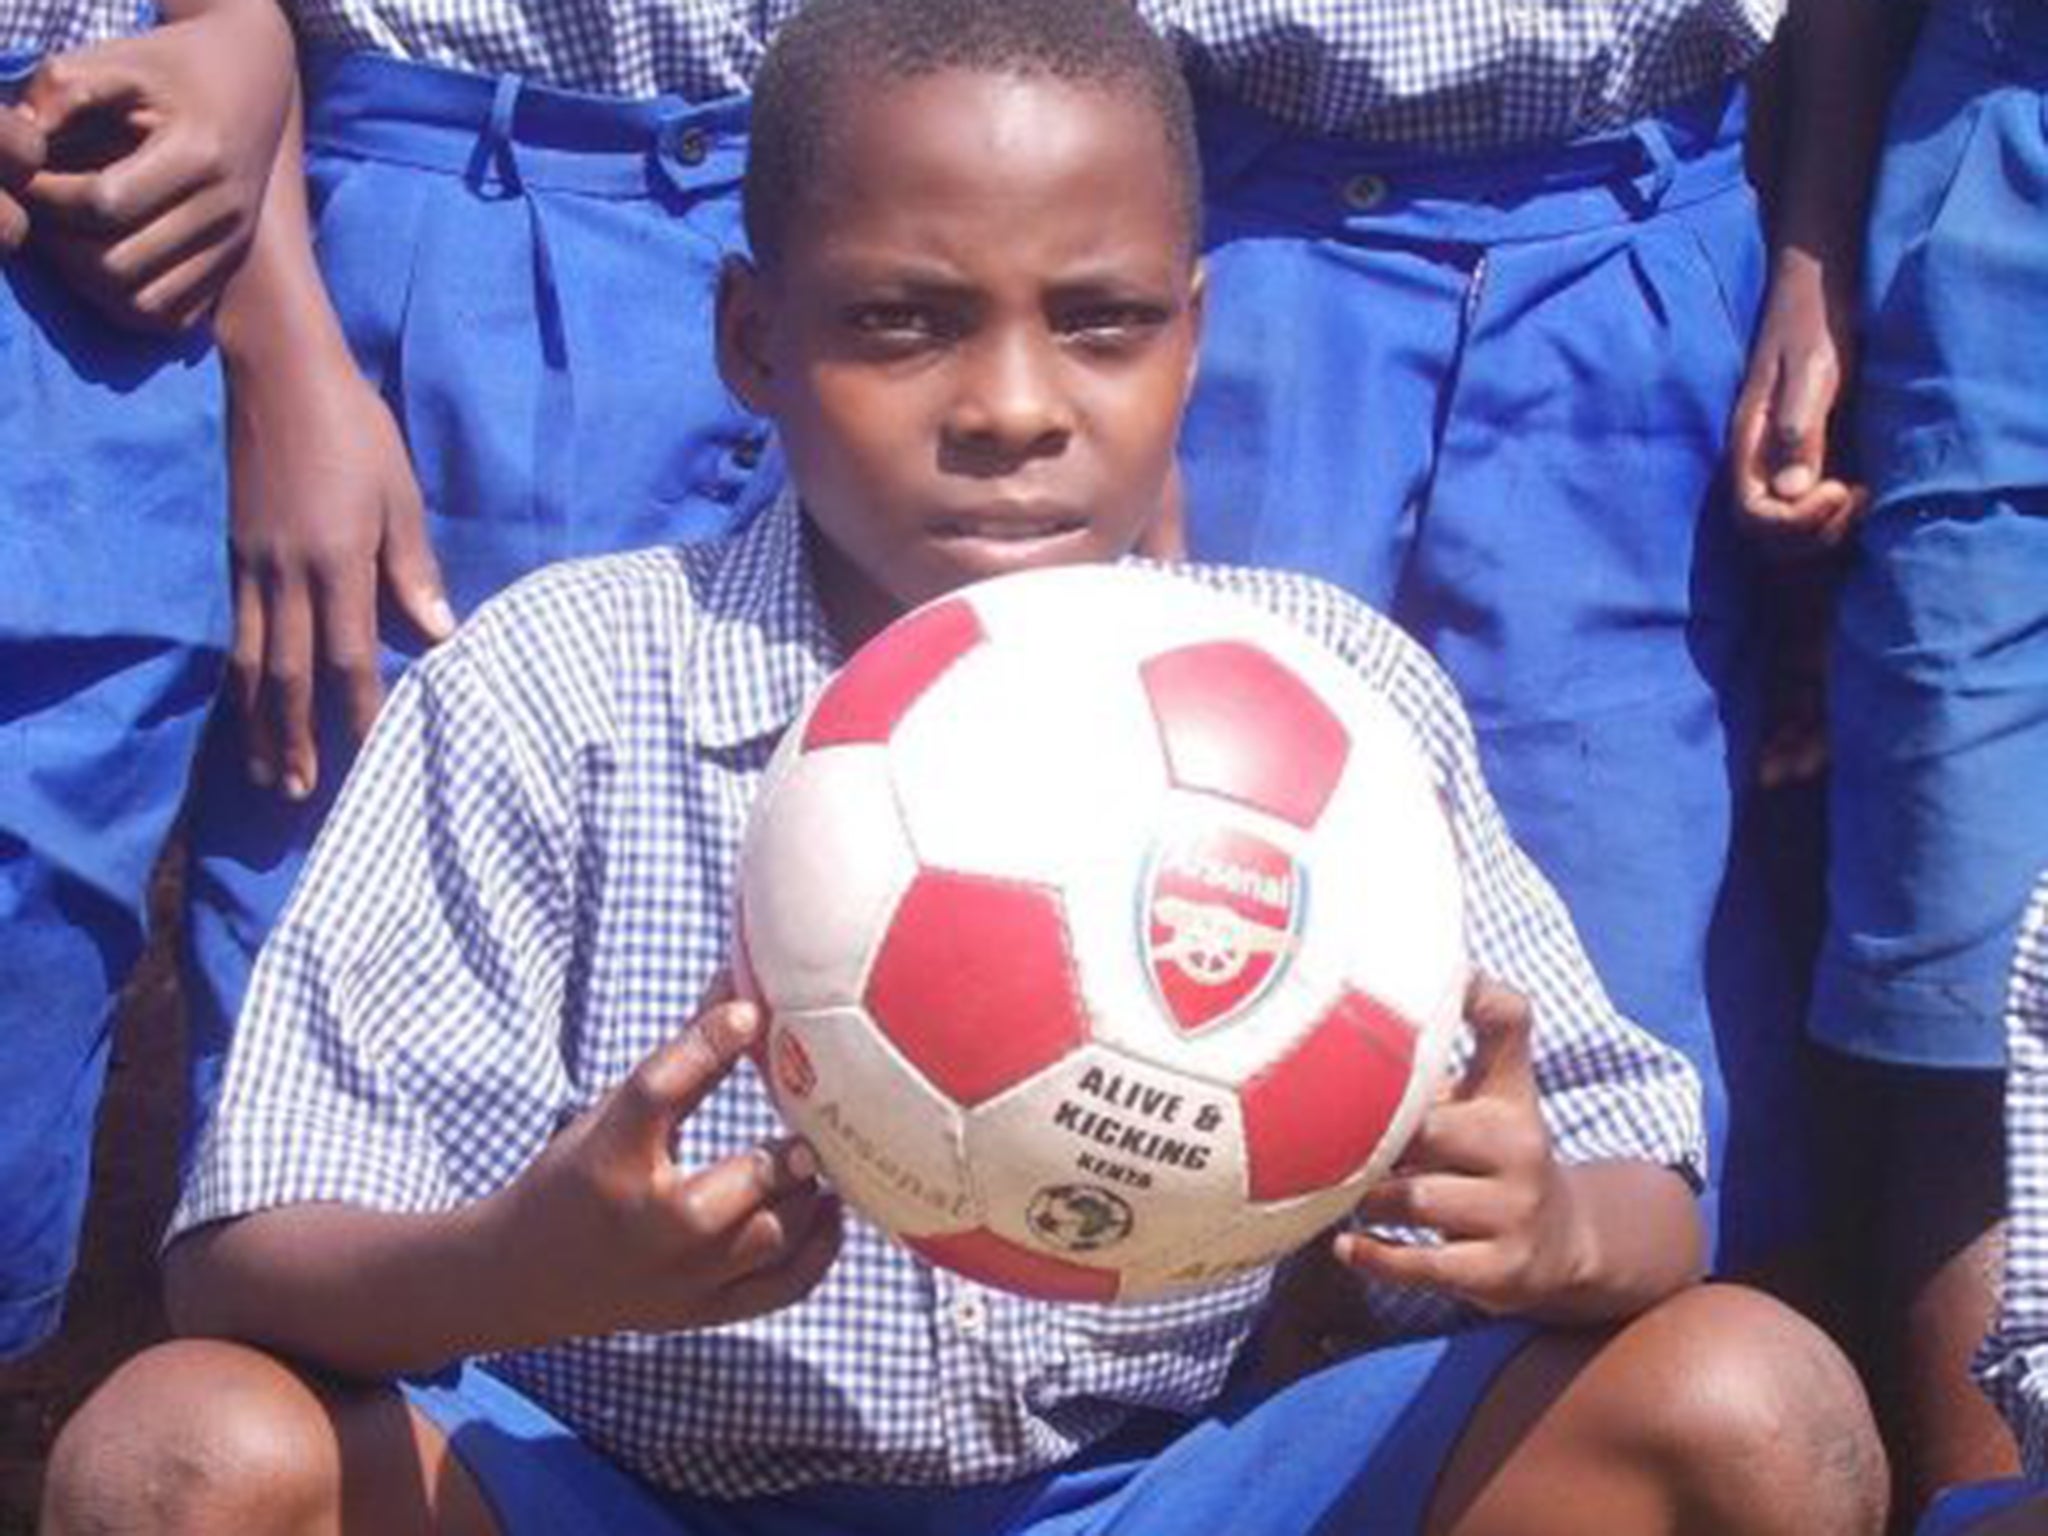 A Kenyan team uses an Alive and Kicking ball – and helps create jobs